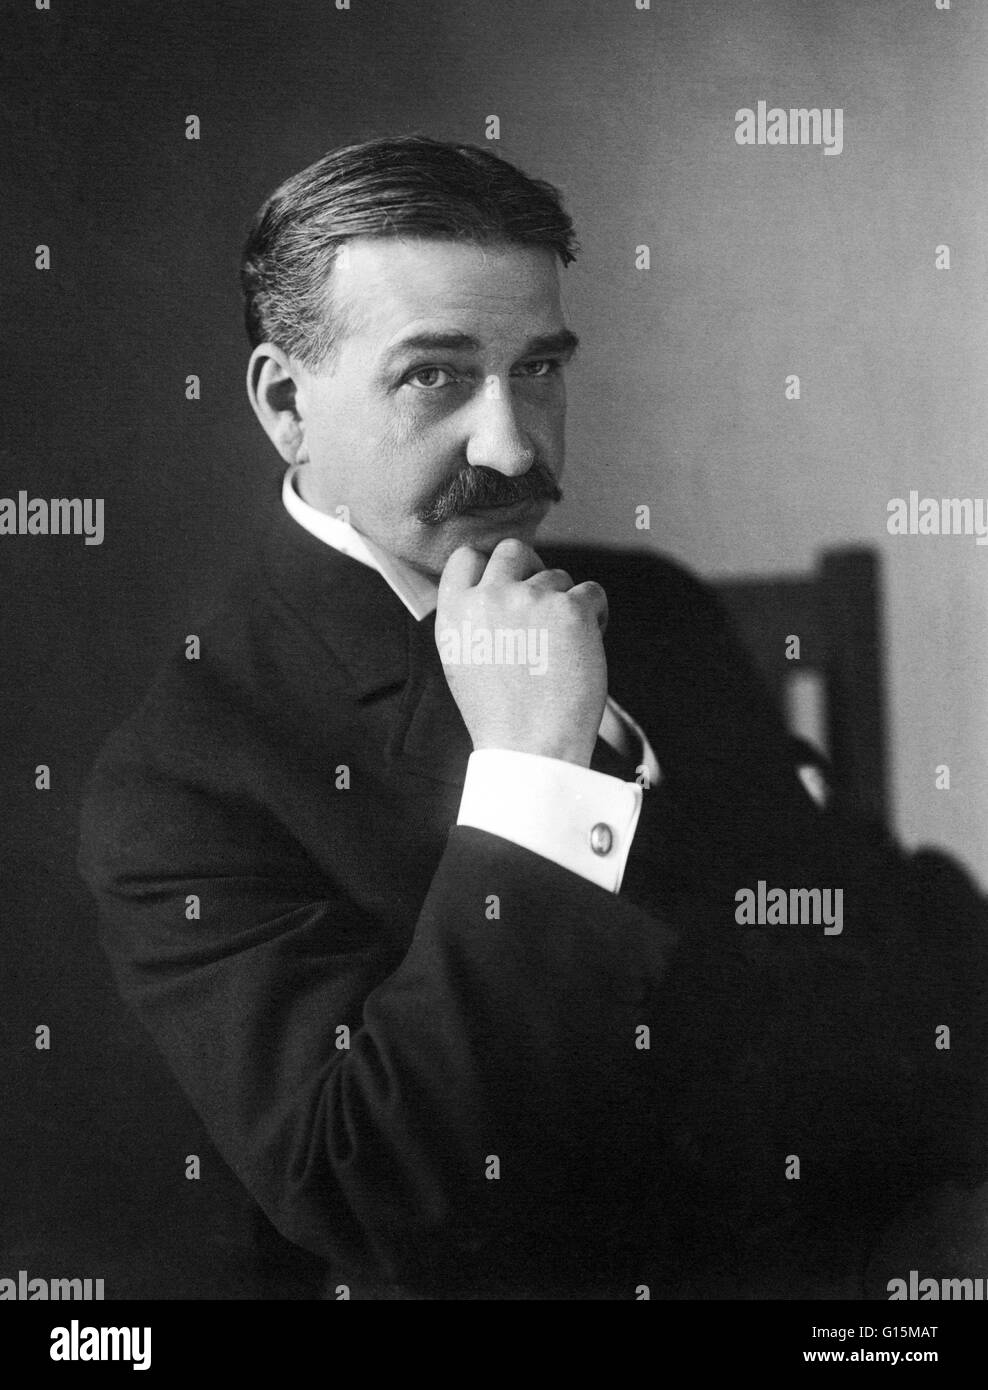 Lyman Frank Baum (1856-1919) was an American author of children's books, best known for writing The Wonderful Wizard of Oz. He wrote thirteen novel sequels, nine other fantasy novels, and a host of other works and made numerous attempts to bring his works Stock Photo